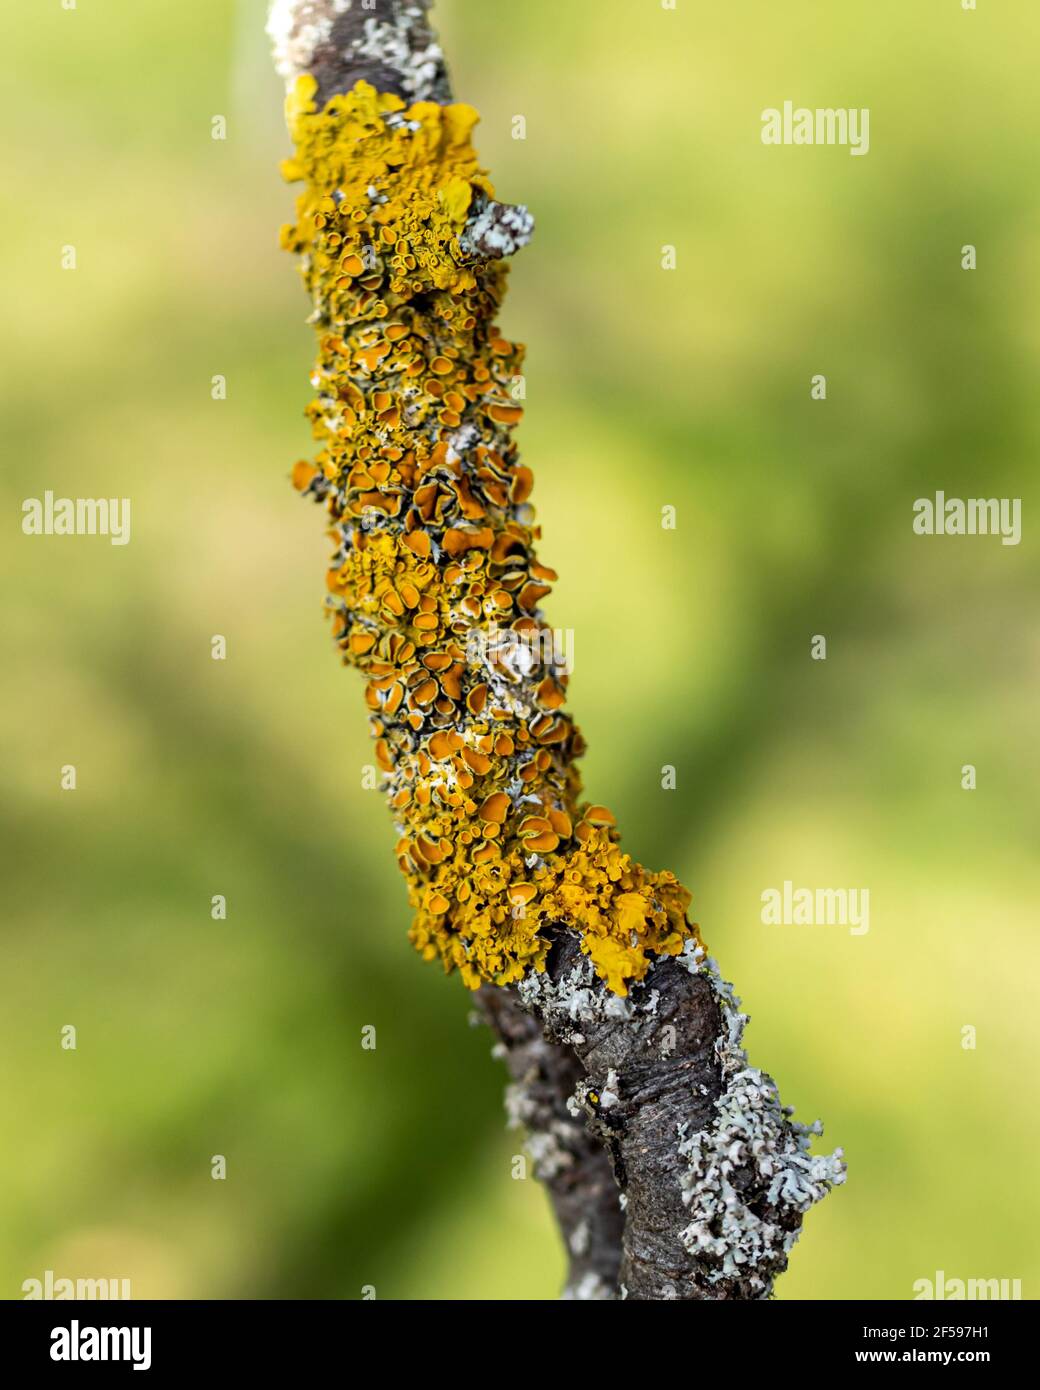 Lichen on a branch of an apple tree Stock Photo